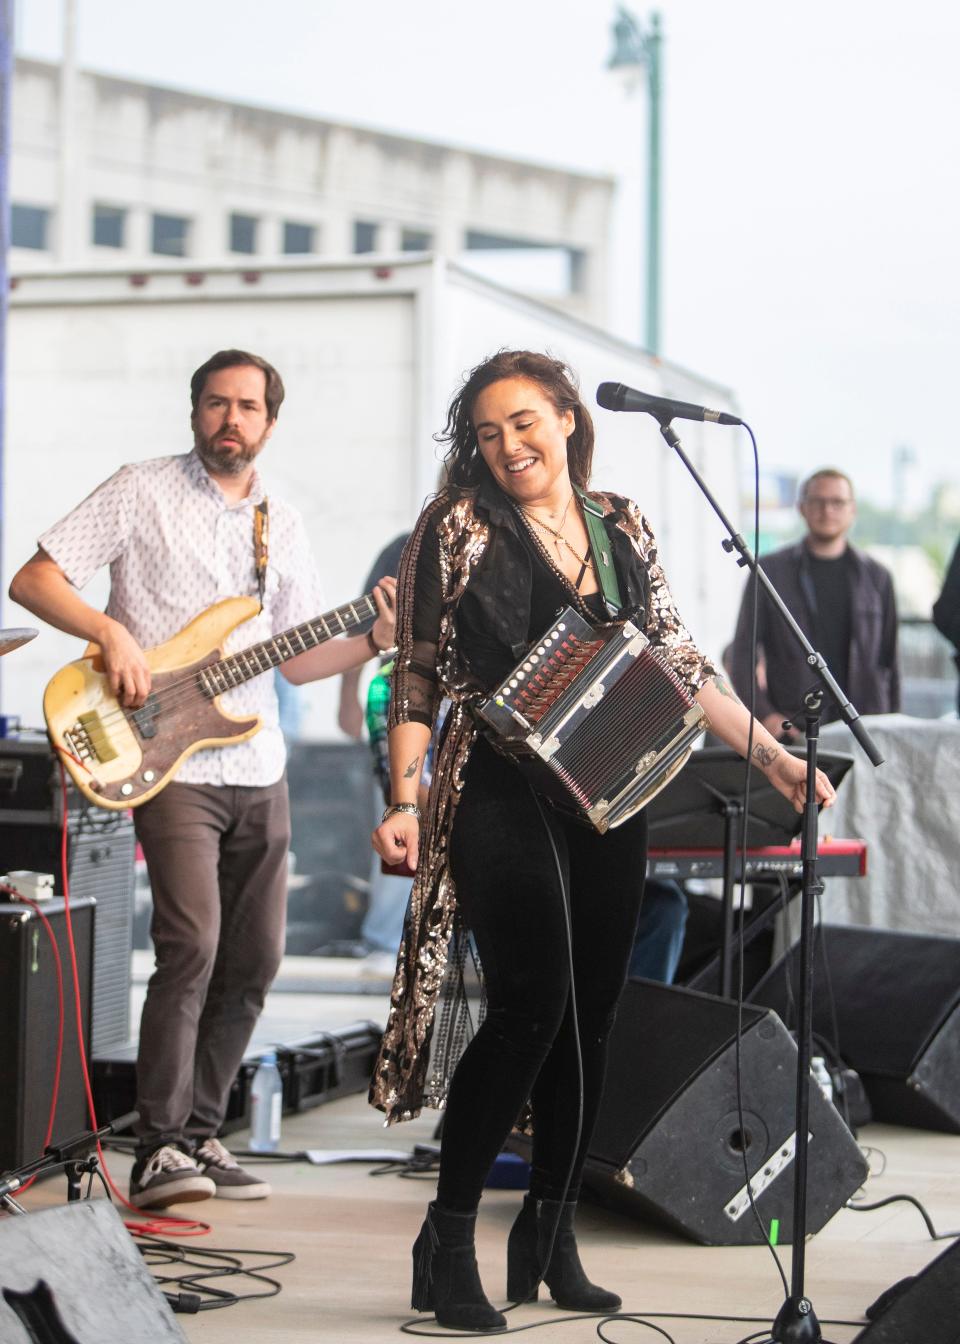 Marcella & Her Lovers will perform at this year's 901 Fest at Railgarten.